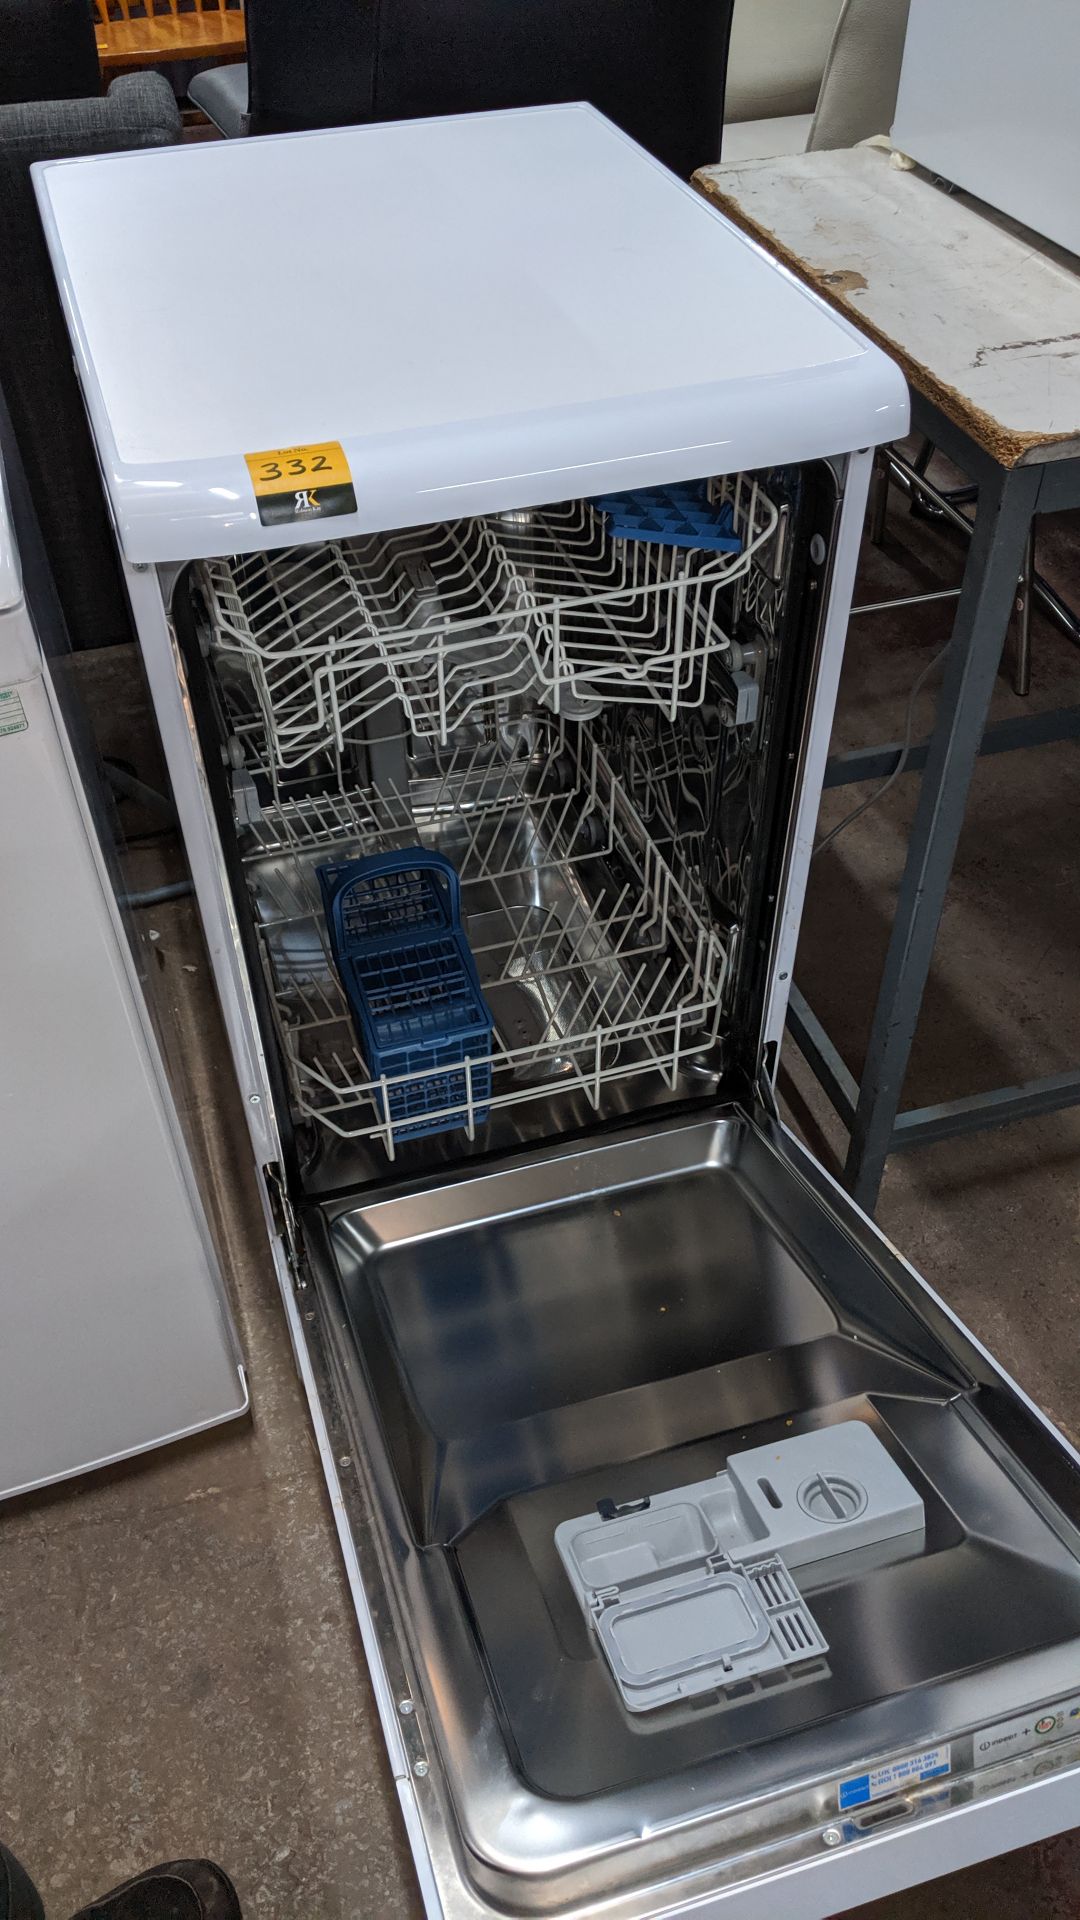 Indesit slimline dishwasher, model DSR 26B1. This is one of a large number of lots used/owned by One - Image 3 of 4